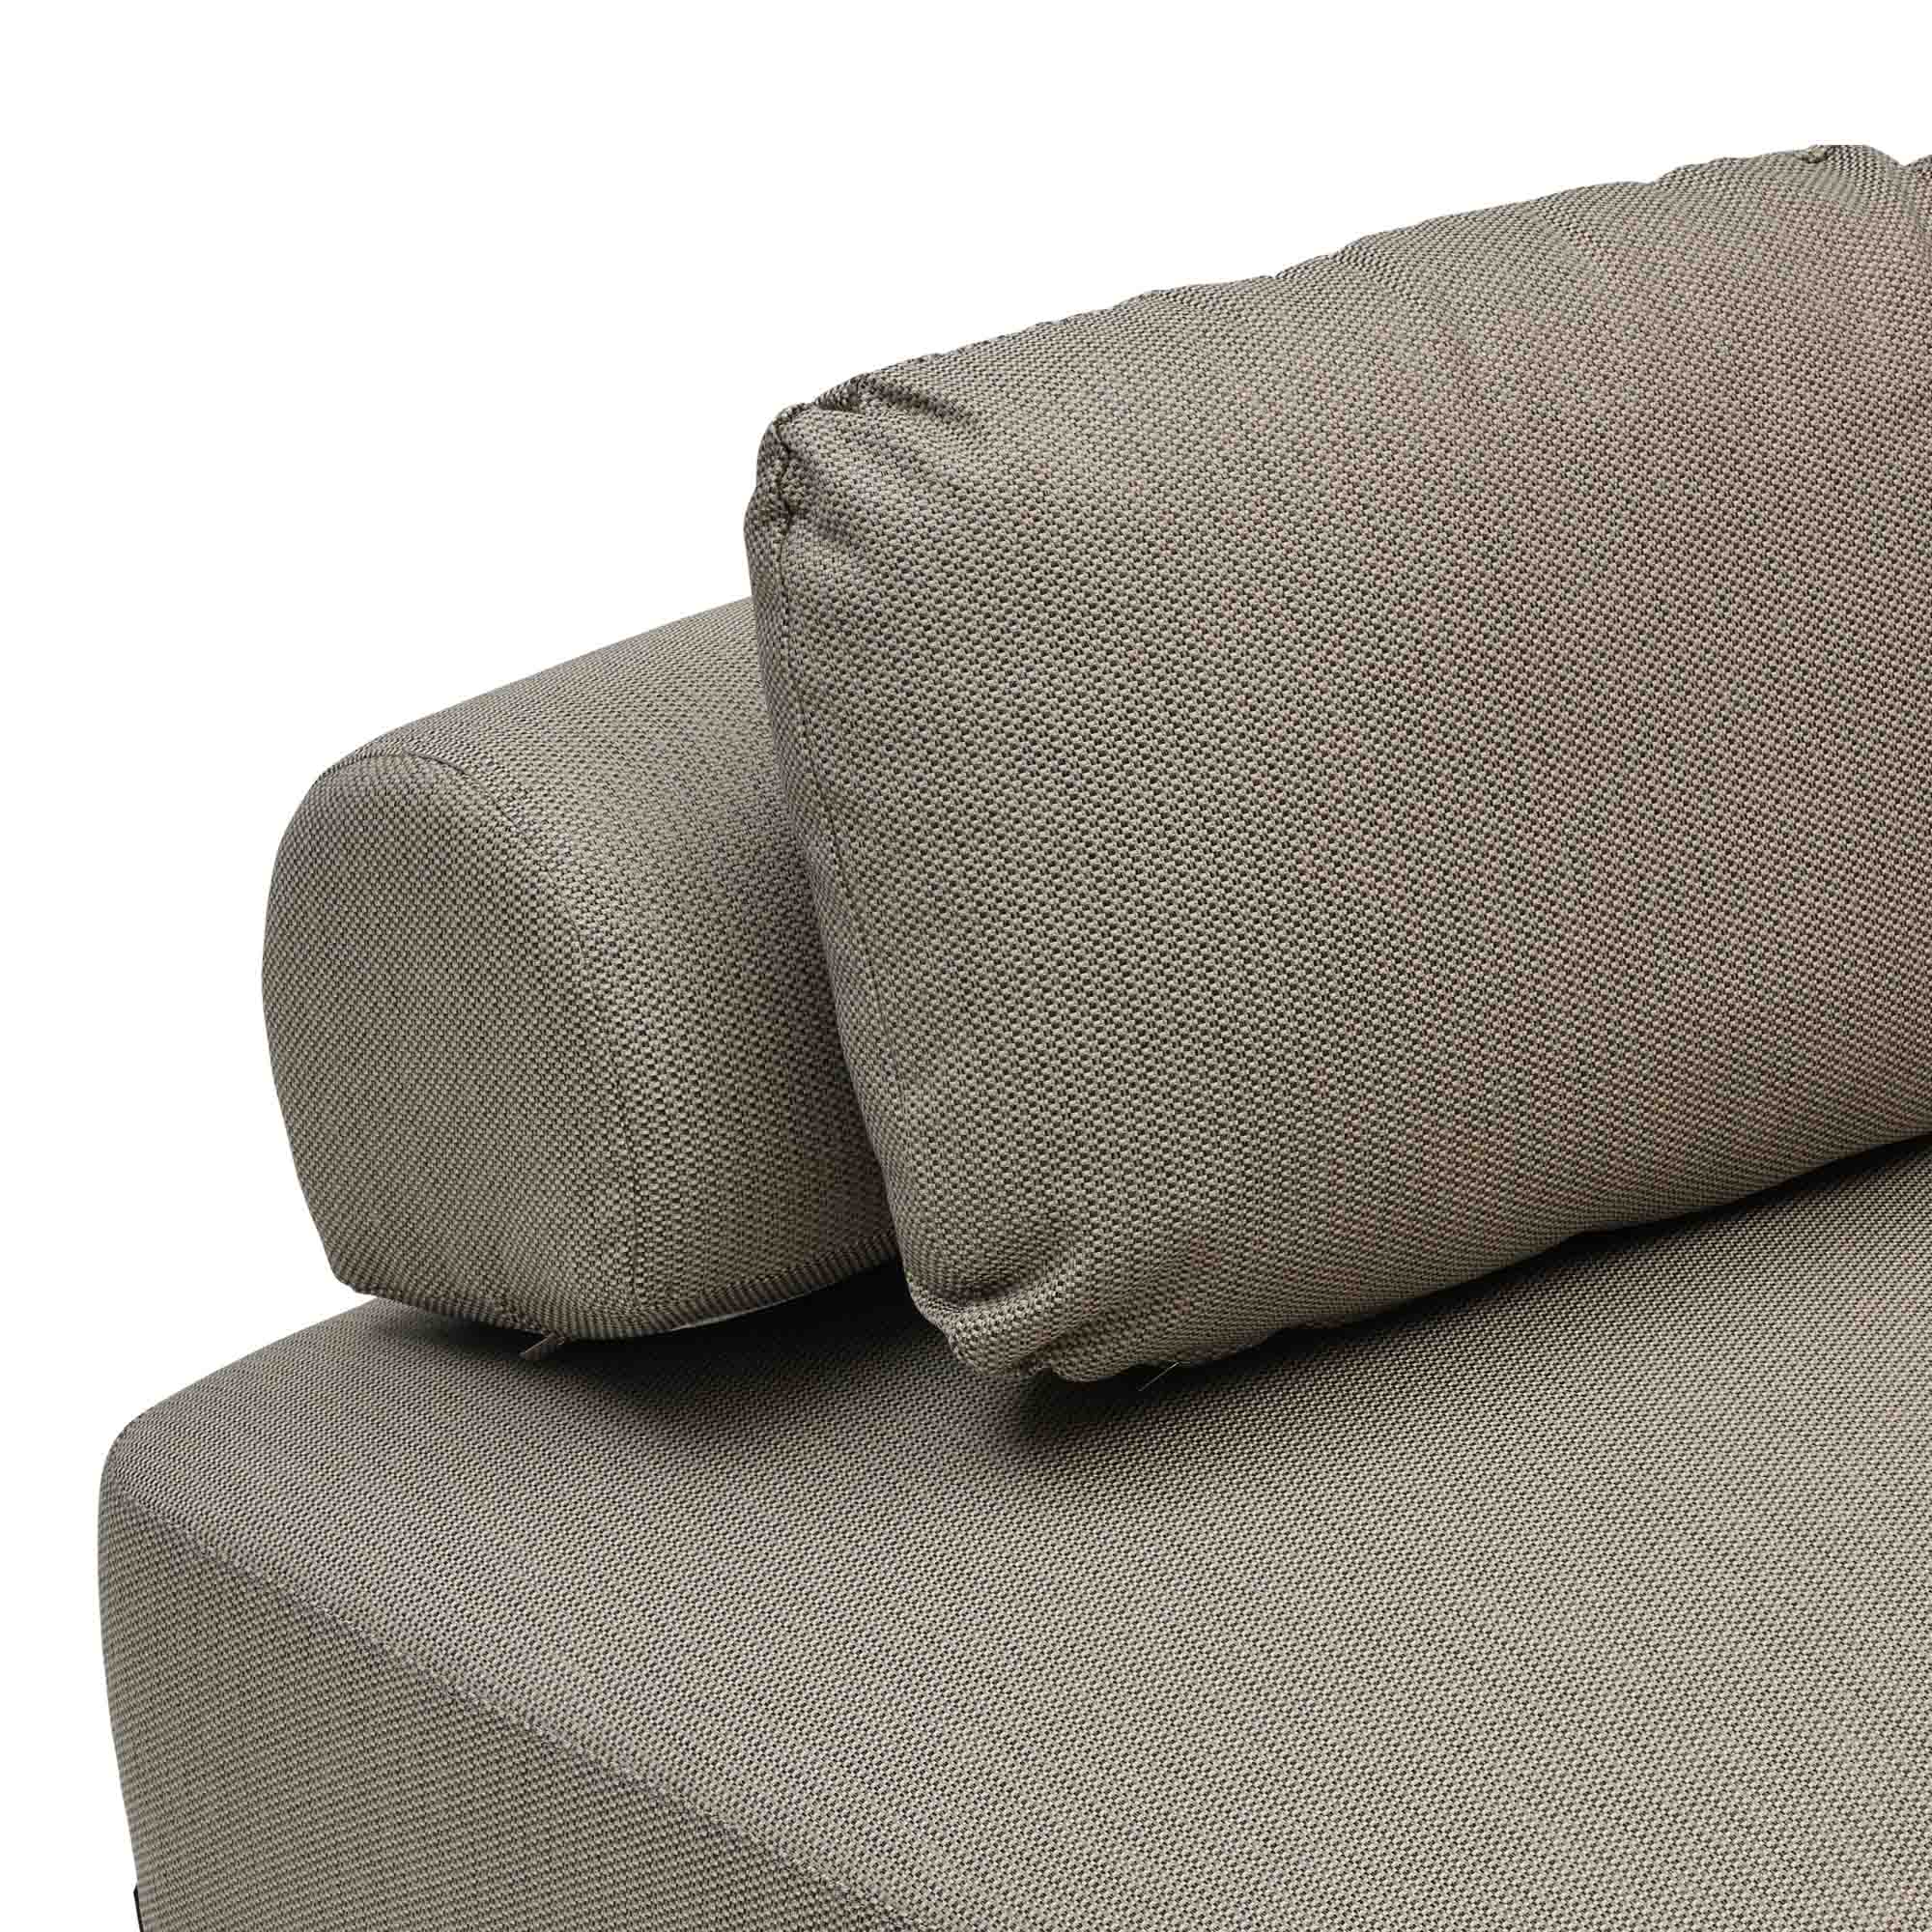 Dune Outdoor Sofa Chair Taupe